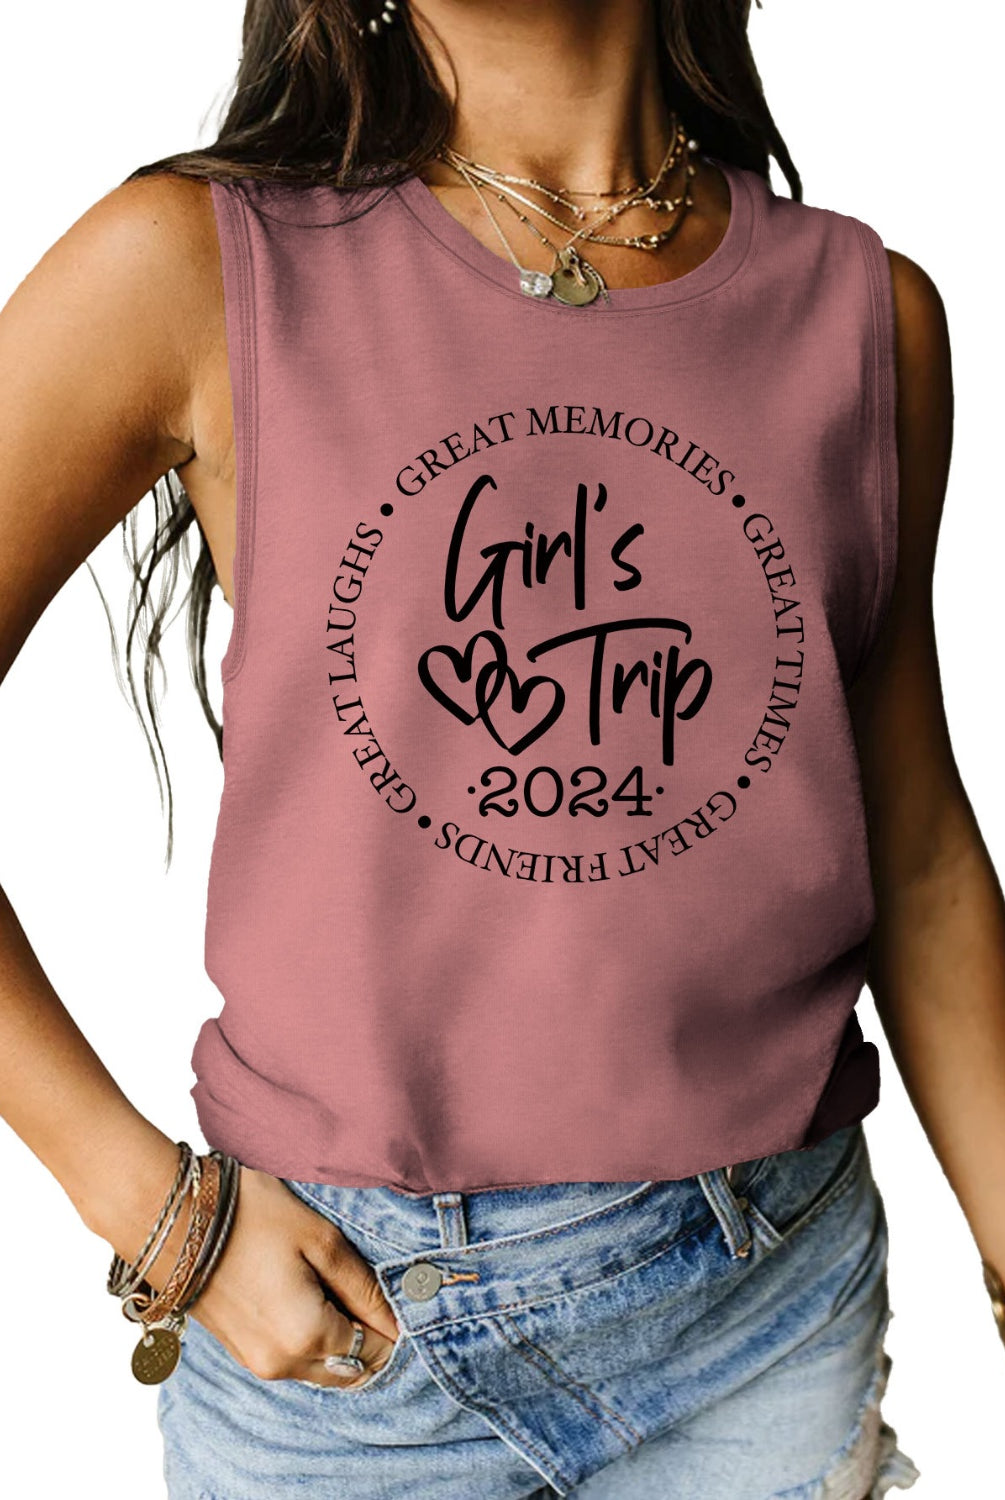 Celebrate Friendship with "Girl's Trip 2024" Graphic Tank | GemThreads Boutique - GemThreads Boutique Celebrate Friendship with "Girl's Trip 2024" Graphic Tank | GemThreads Boutique